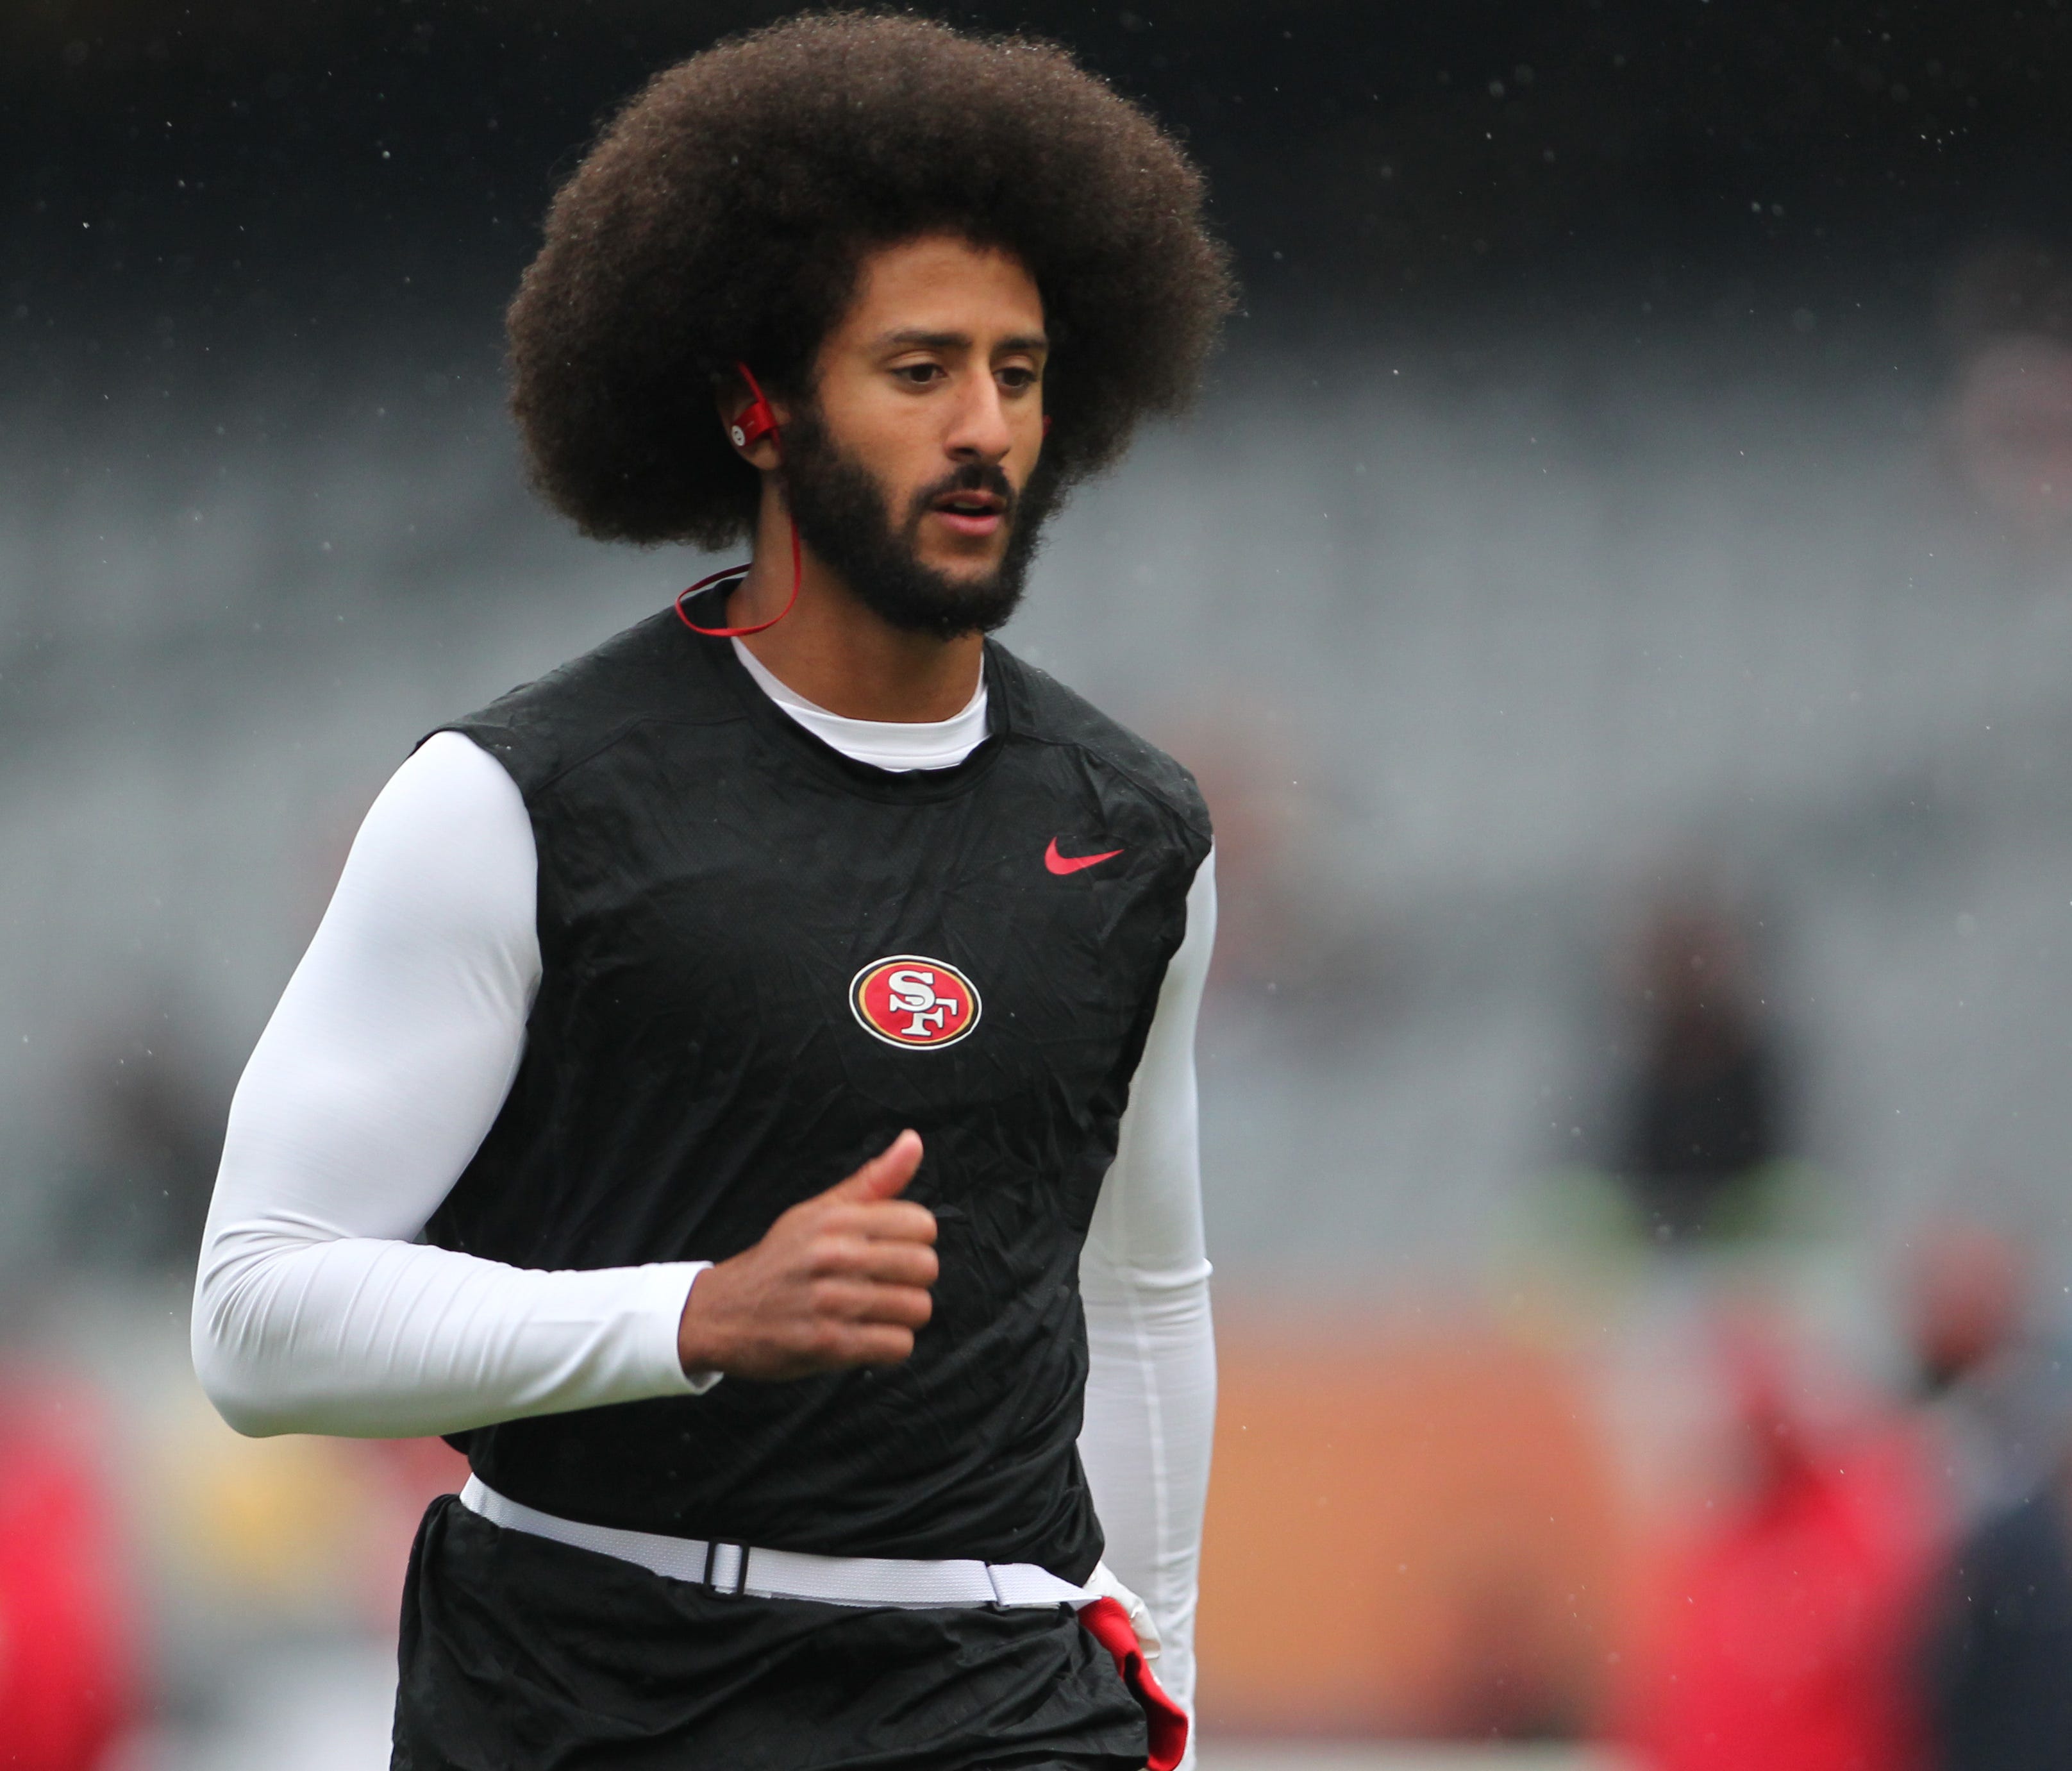 Information on nearly 1,200 NFL players, including QB Colin Kaepernick, may have been comprimised.